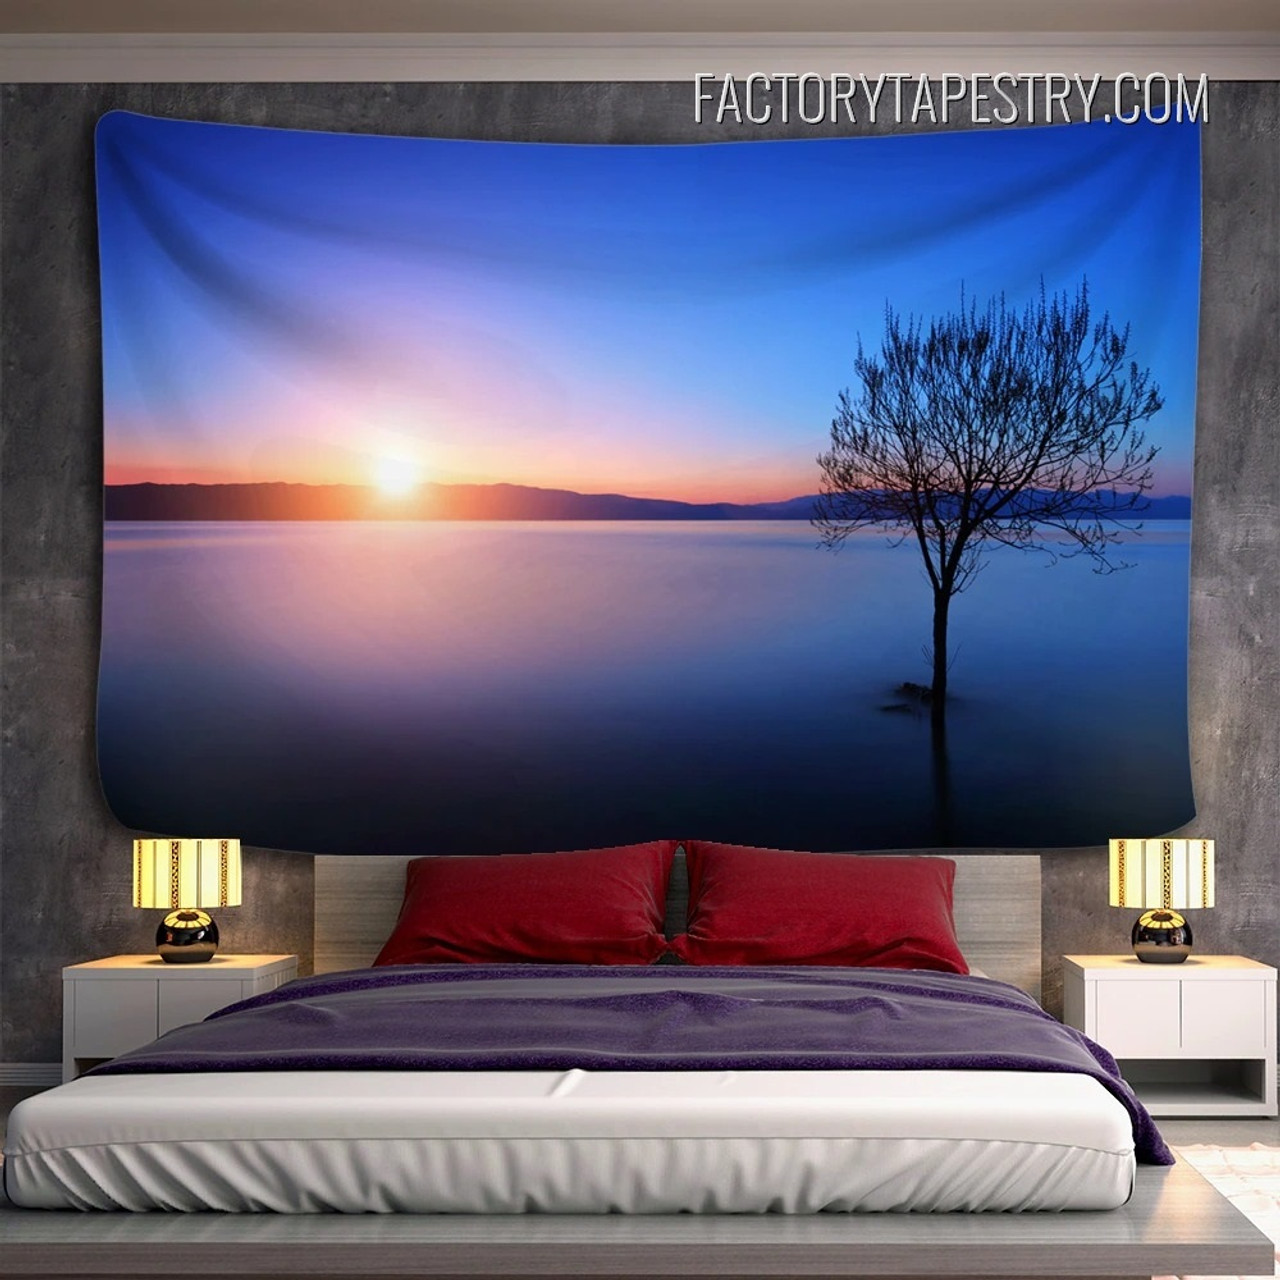 GRETIFY Las Vegas Tapestry For Bedroom Sunset Red Rock Canyon In Las Vegas  USA Tapestries Wall Art Decoration Wall Hanging For Living Dorm Room